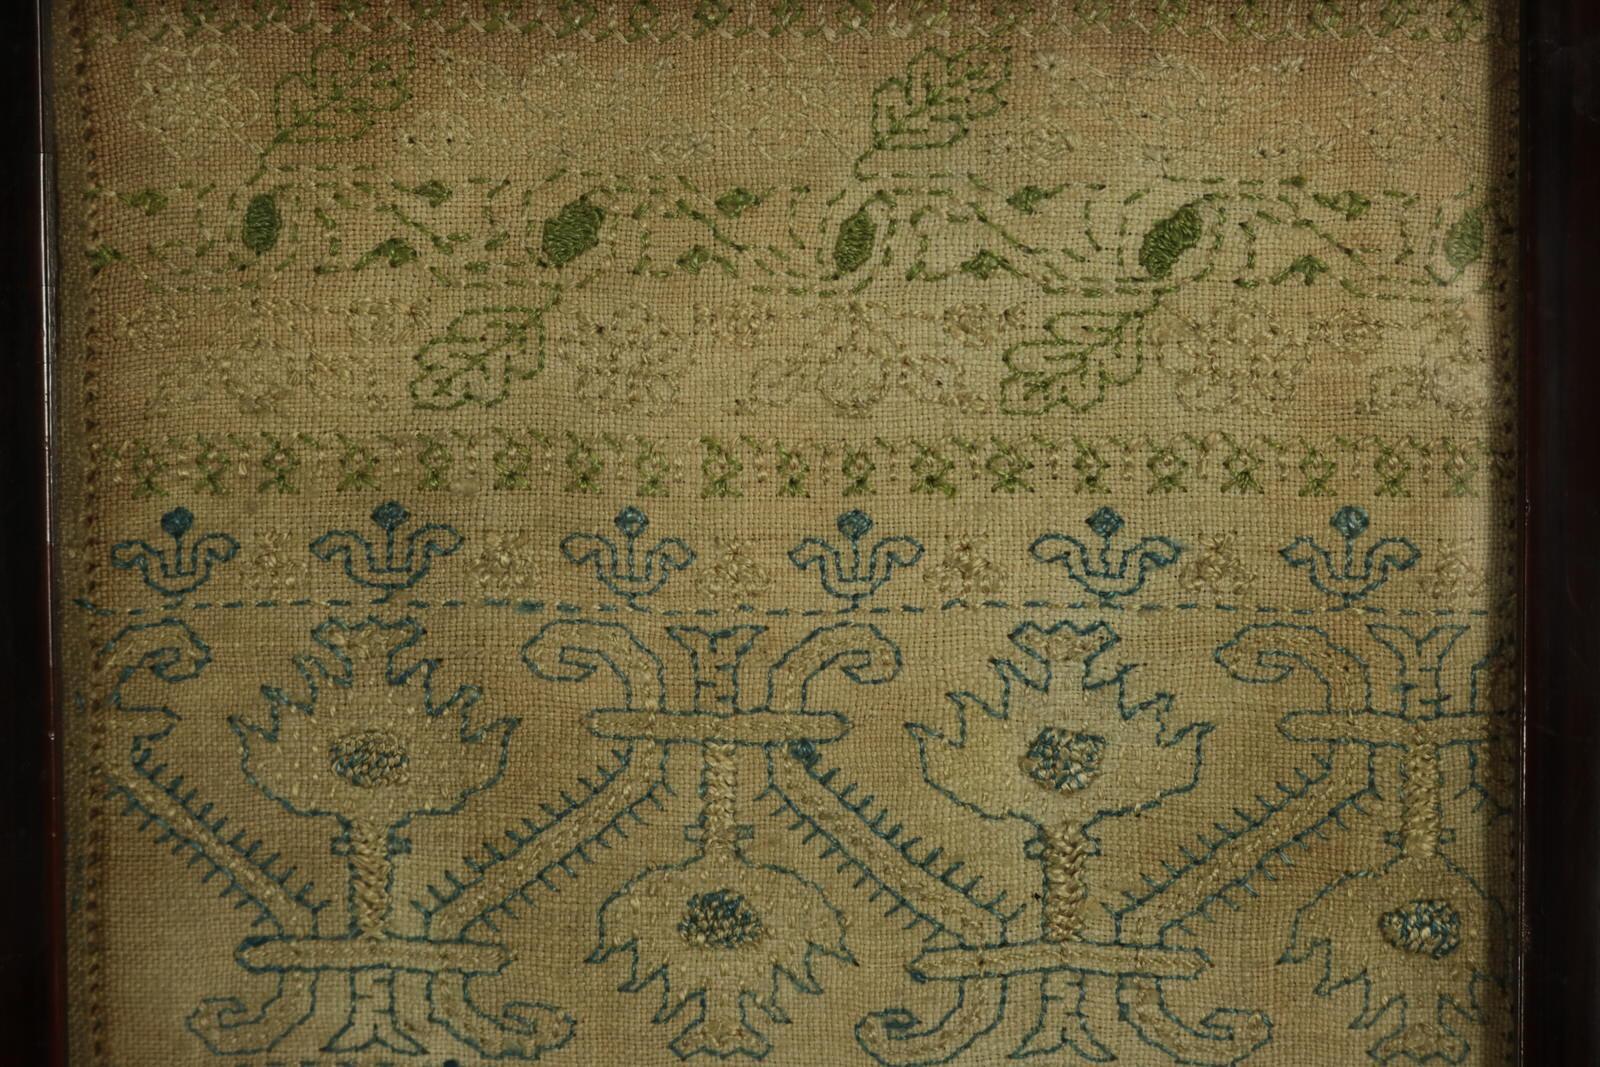 1649 band sampler by HW aged 8, worked in silks on linen ground, in a variety of fine stitches including raised work and Algerian eye. Simple line borders, multiple traditional complex design bands, one with motifs including frog, strawberry plant,